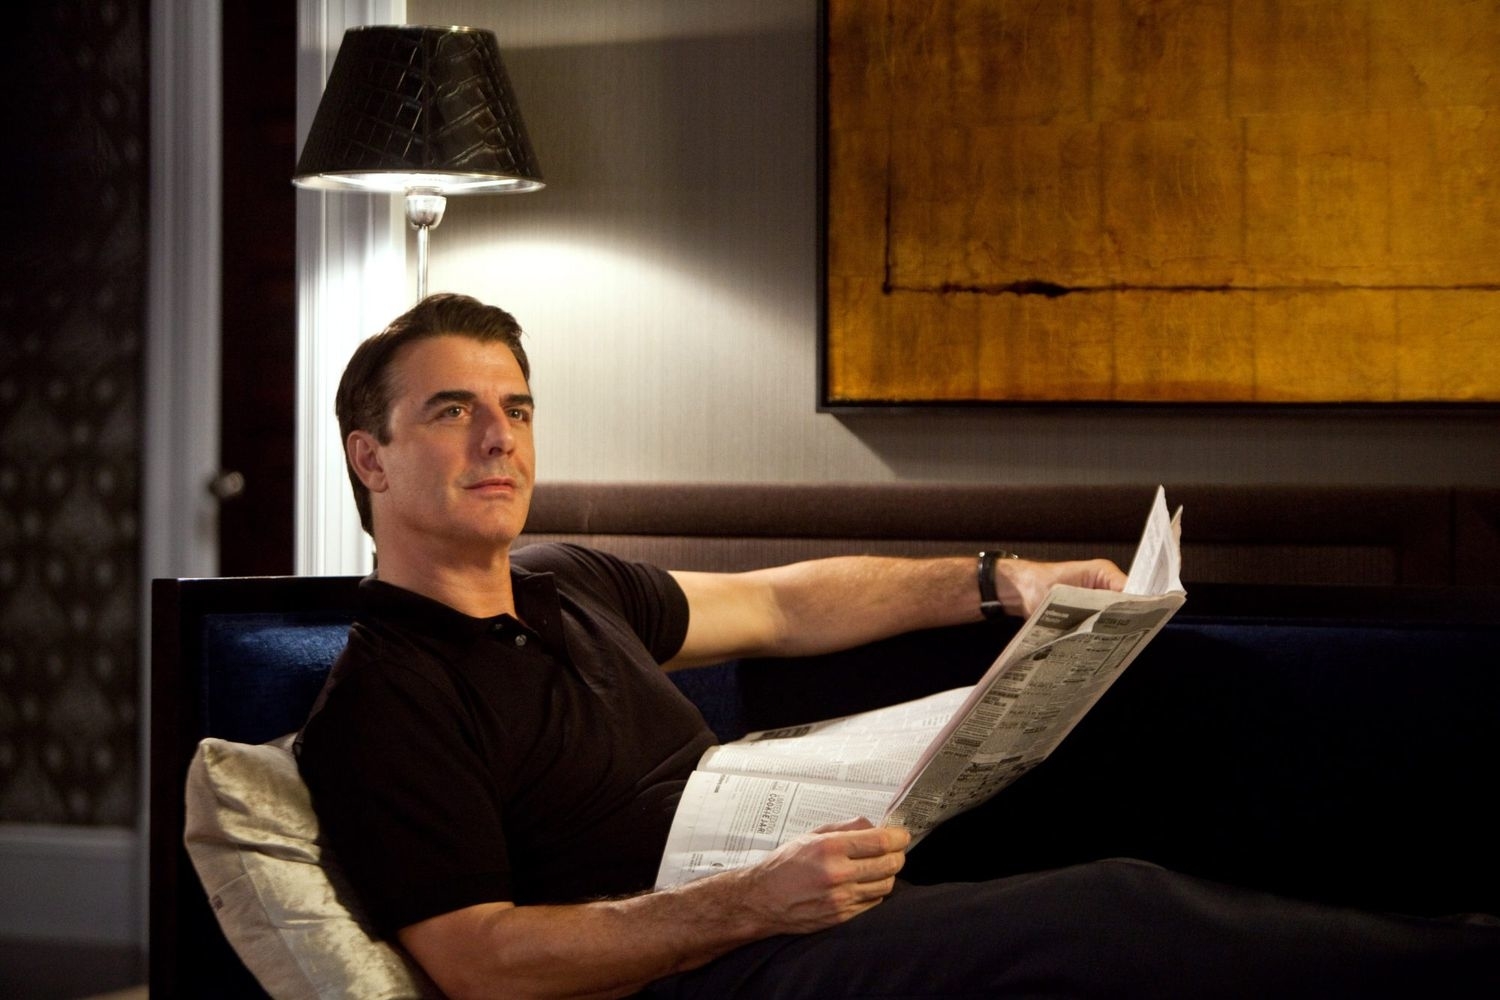 Chris Noth seated, casually dressed, reading a newspaper in a well-lit room